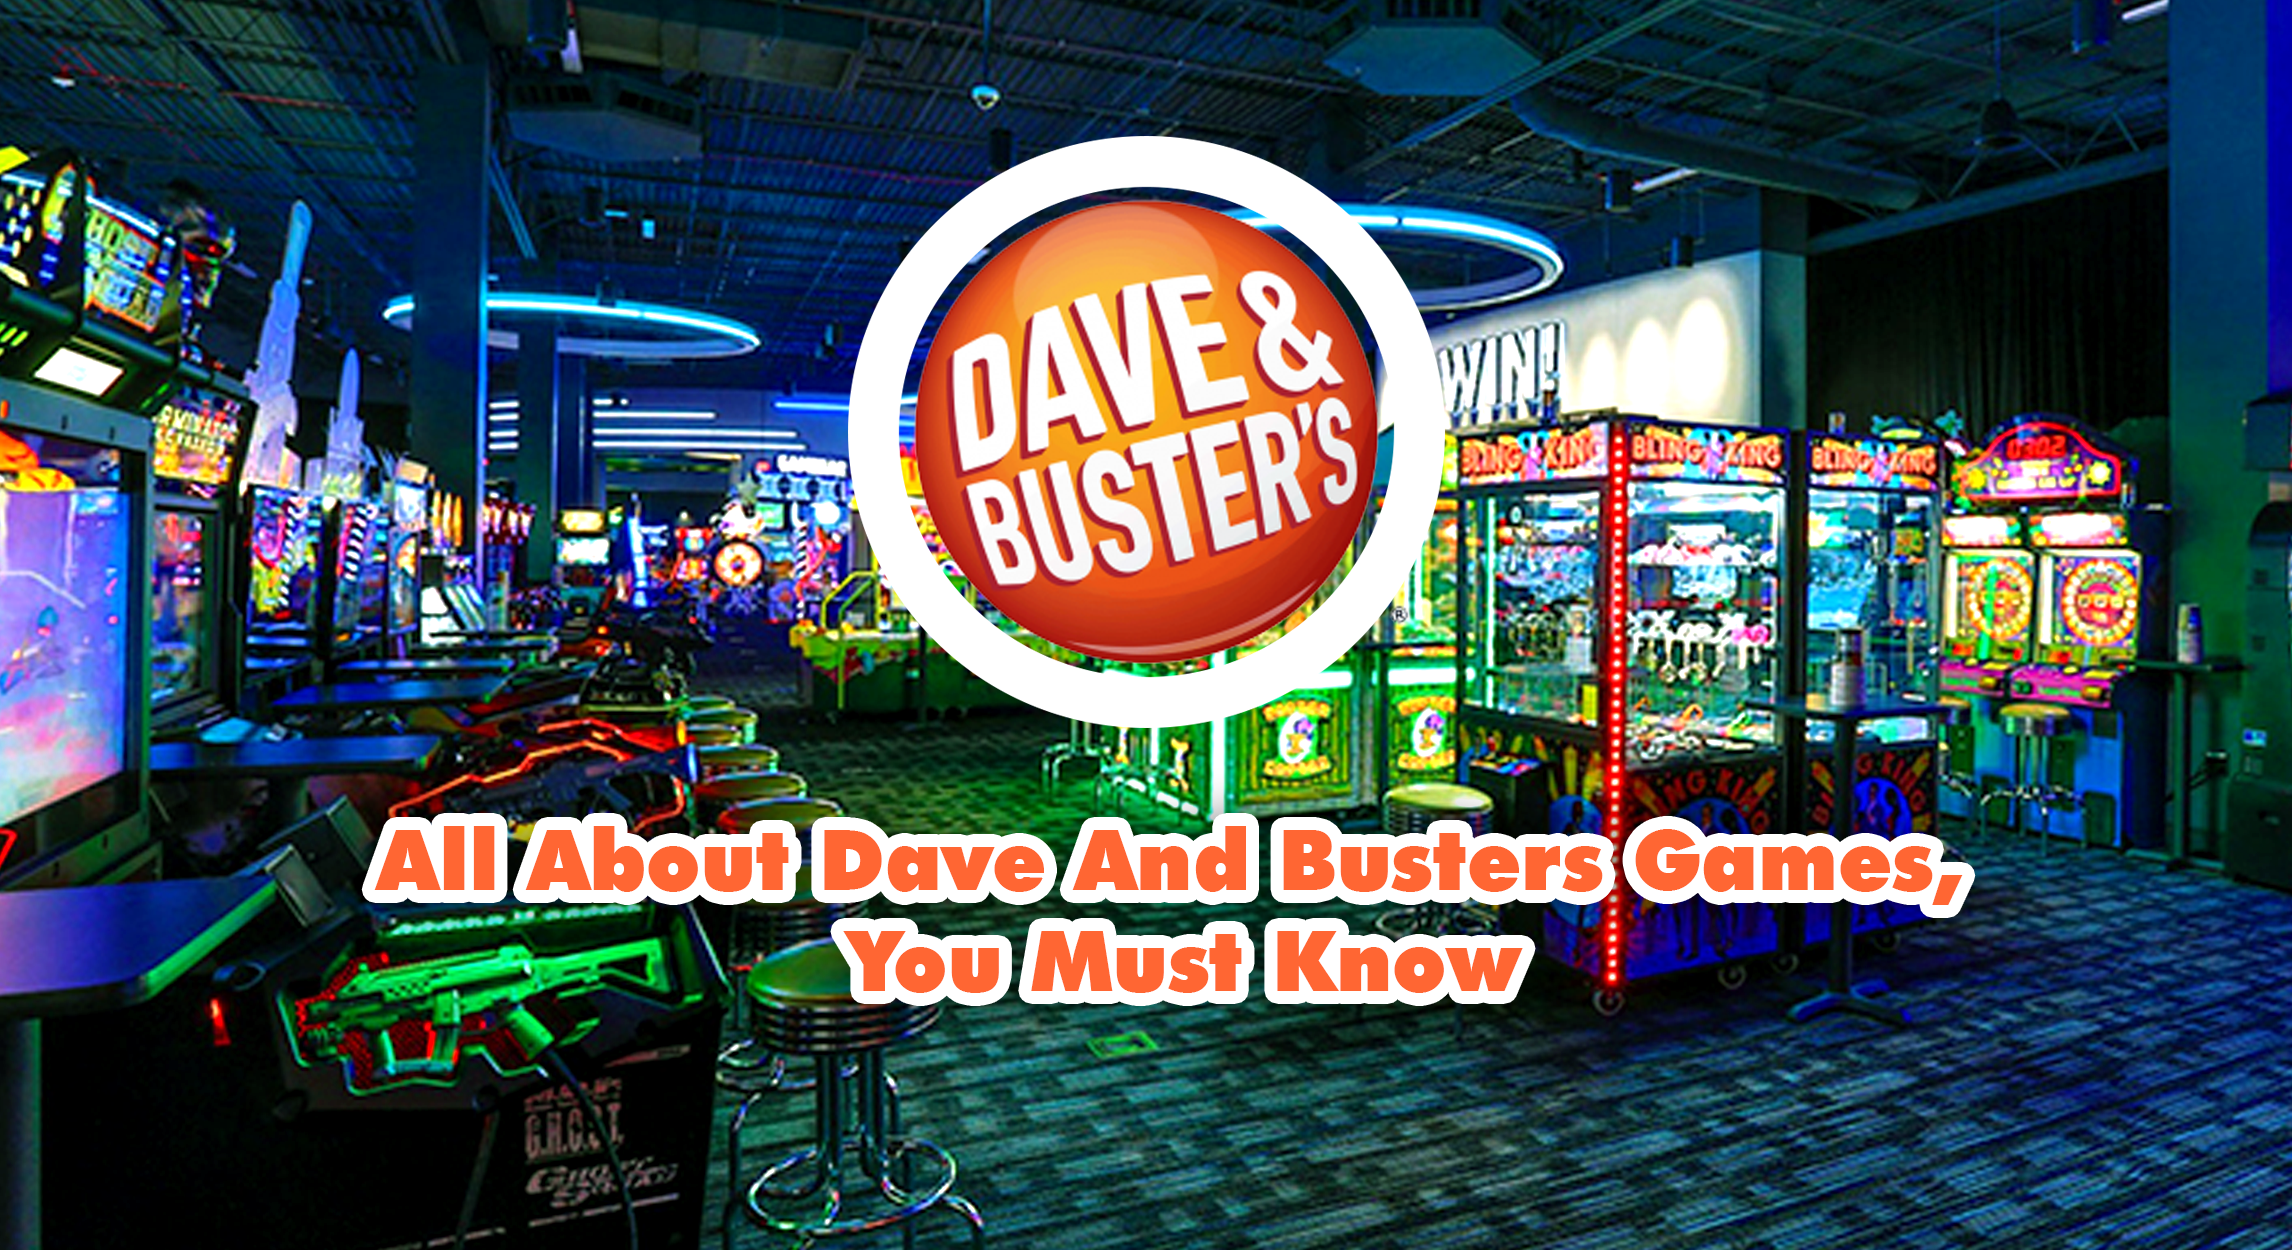 All About Dave And Busters Games, You Must Know